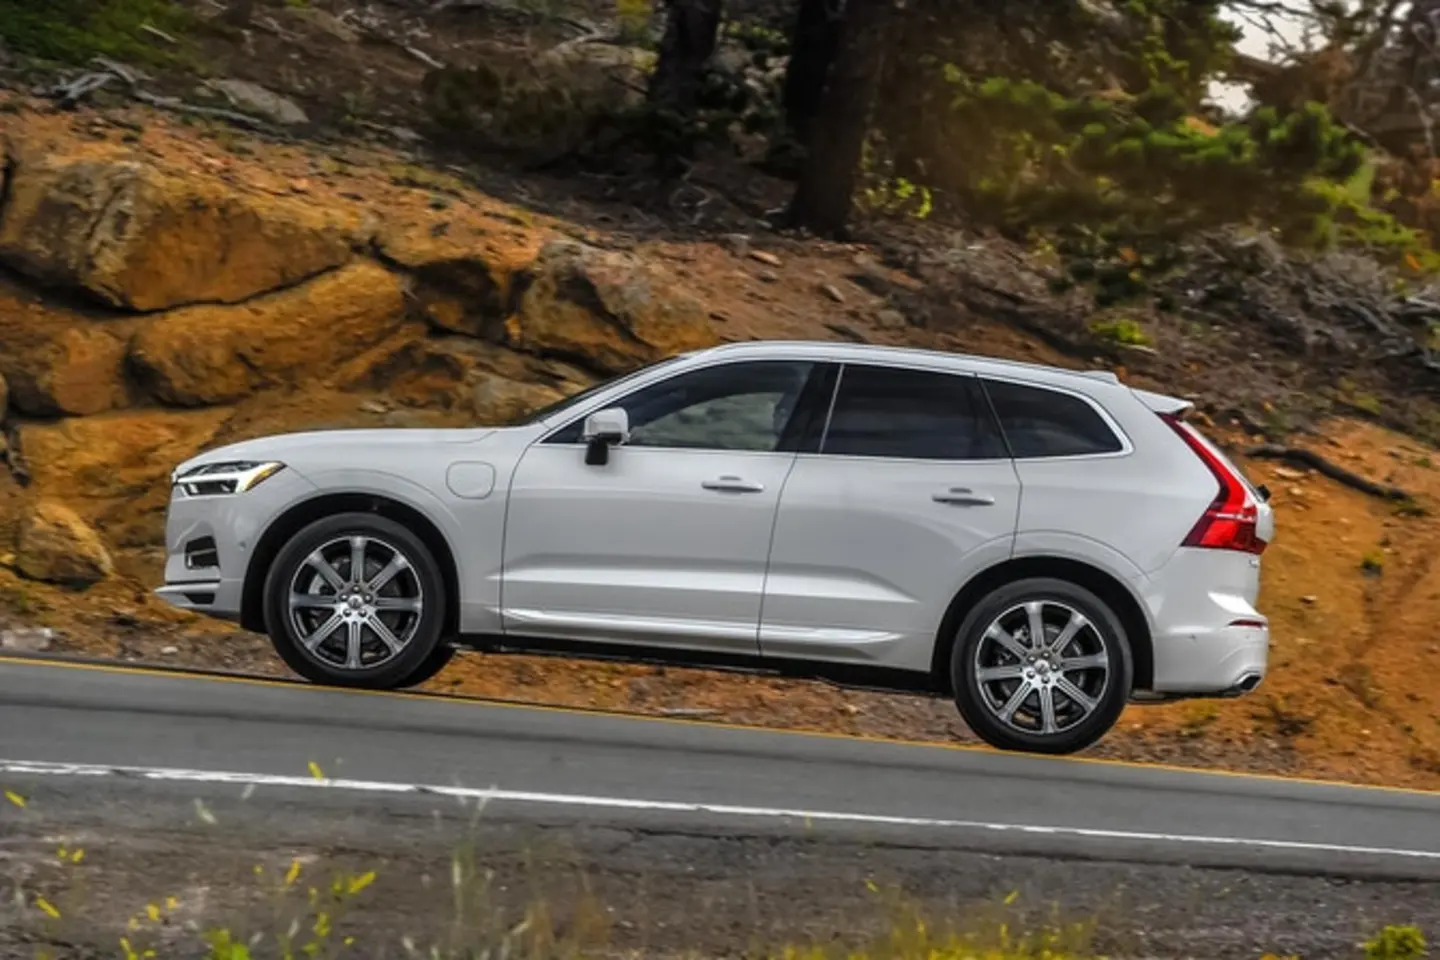 The exterior of a white Volvo XC60